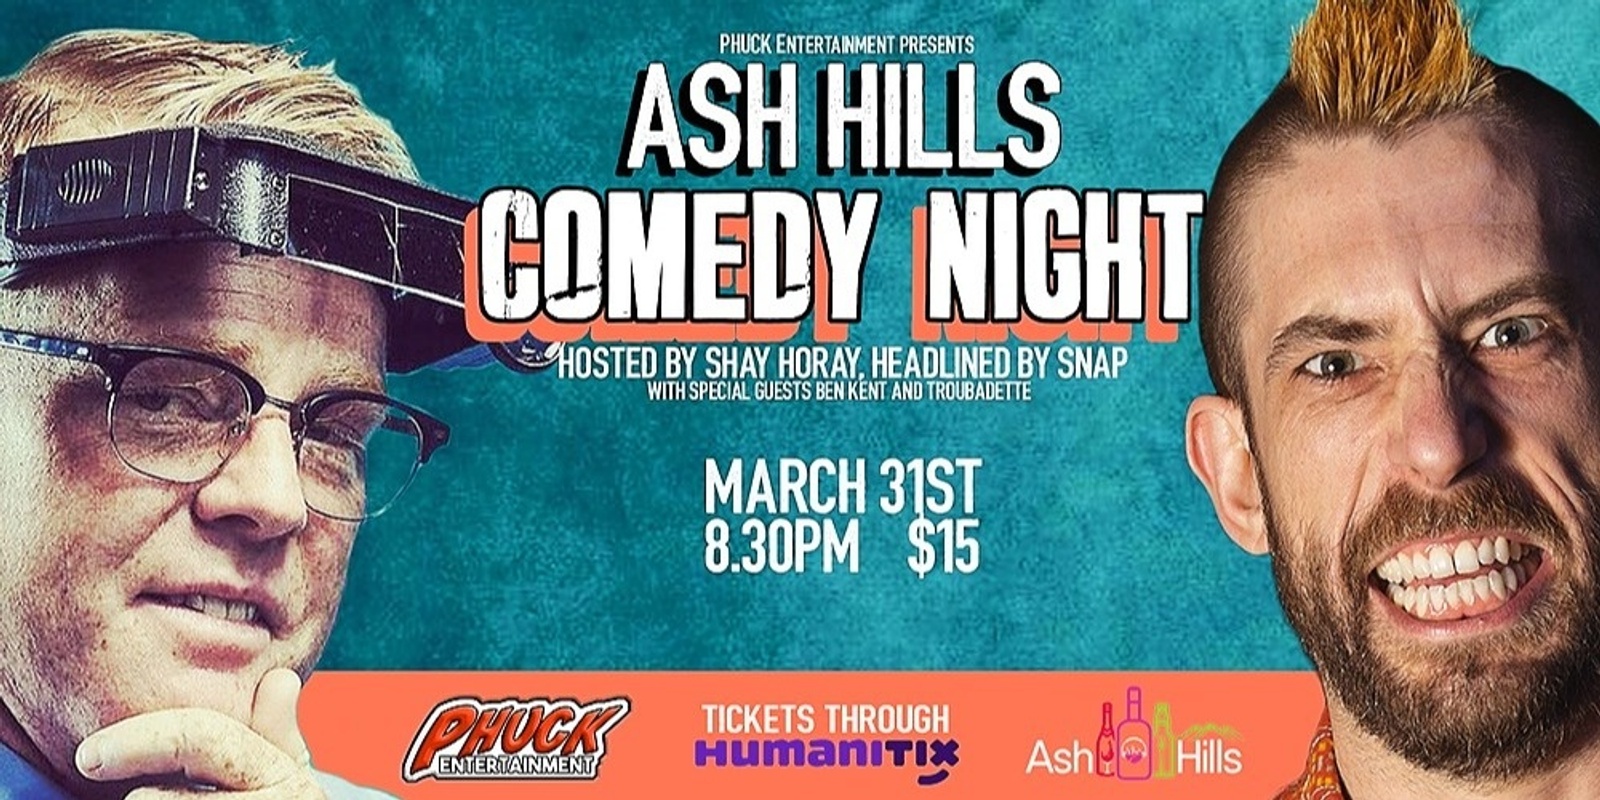 Banner image for Ash Hills Comedy Night